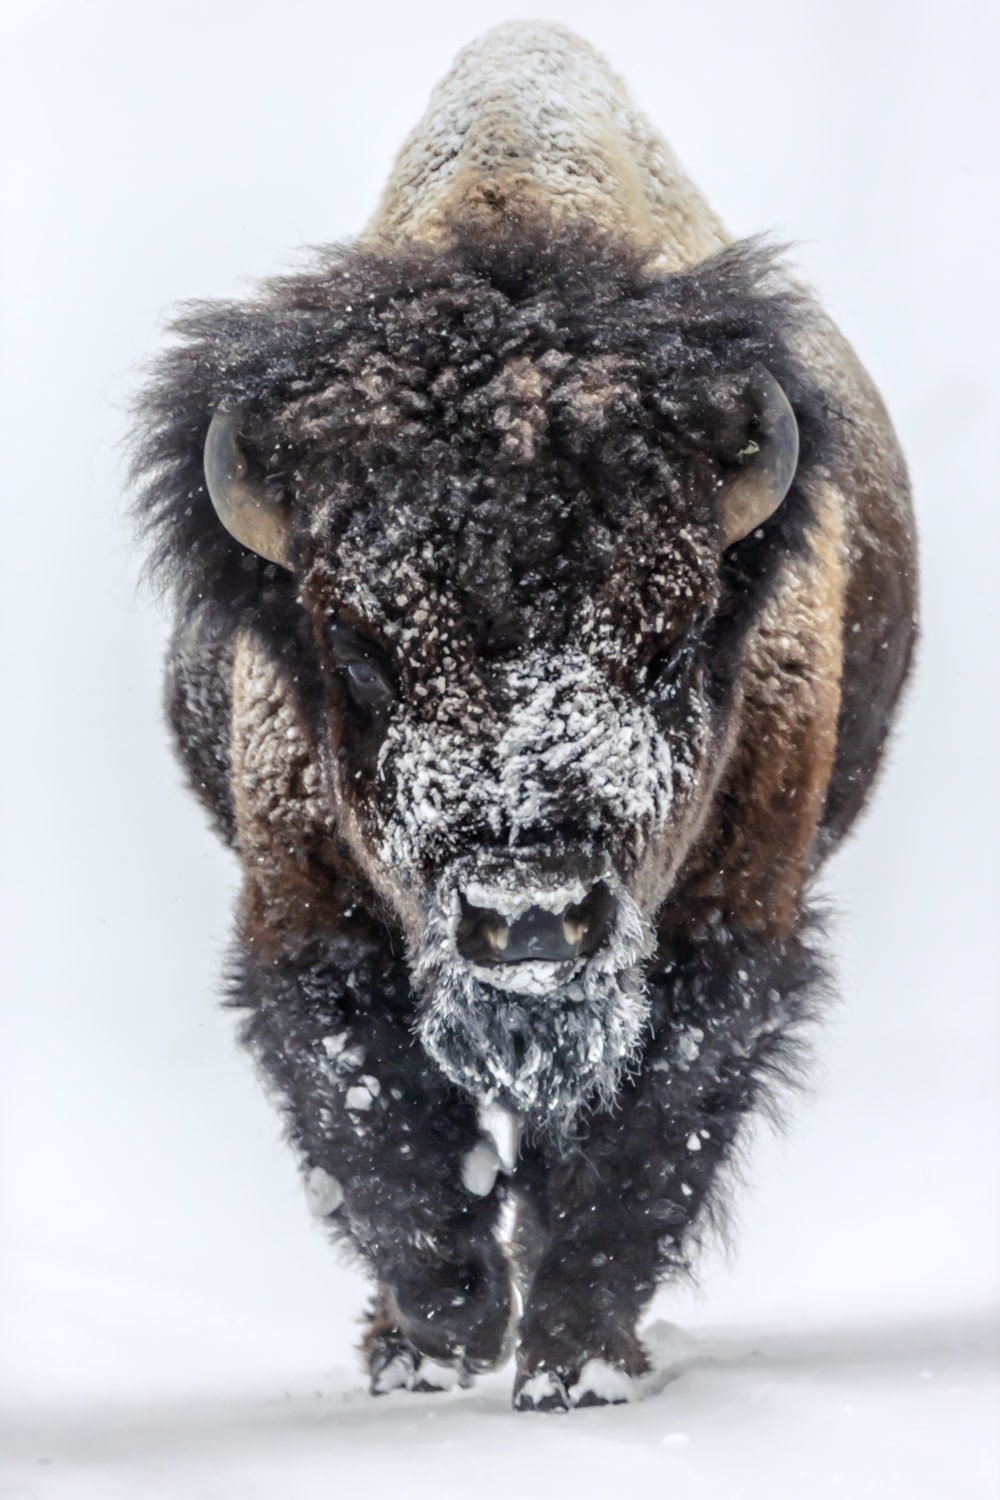 Bison in Wyoming Winter